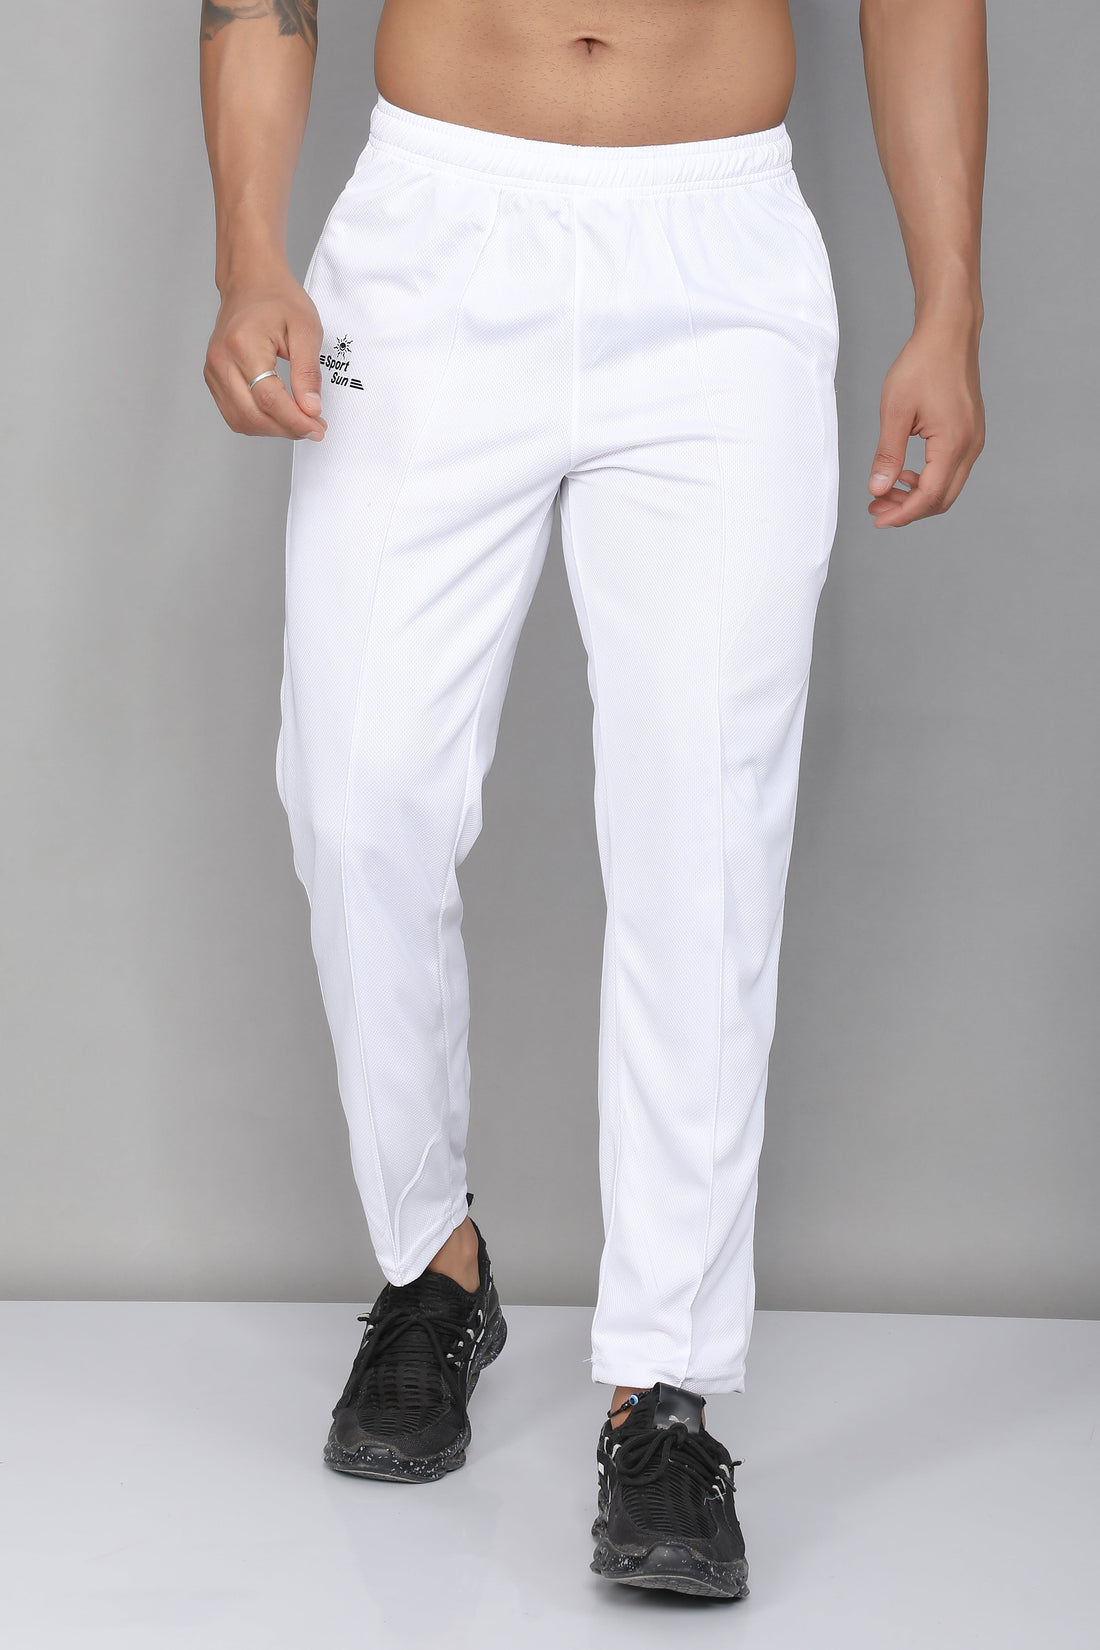 Haoser Men's White Cotton Solid Stylish Track Pant For Everyday at Rs  369.00 | Track Pant | ID: 26043591048